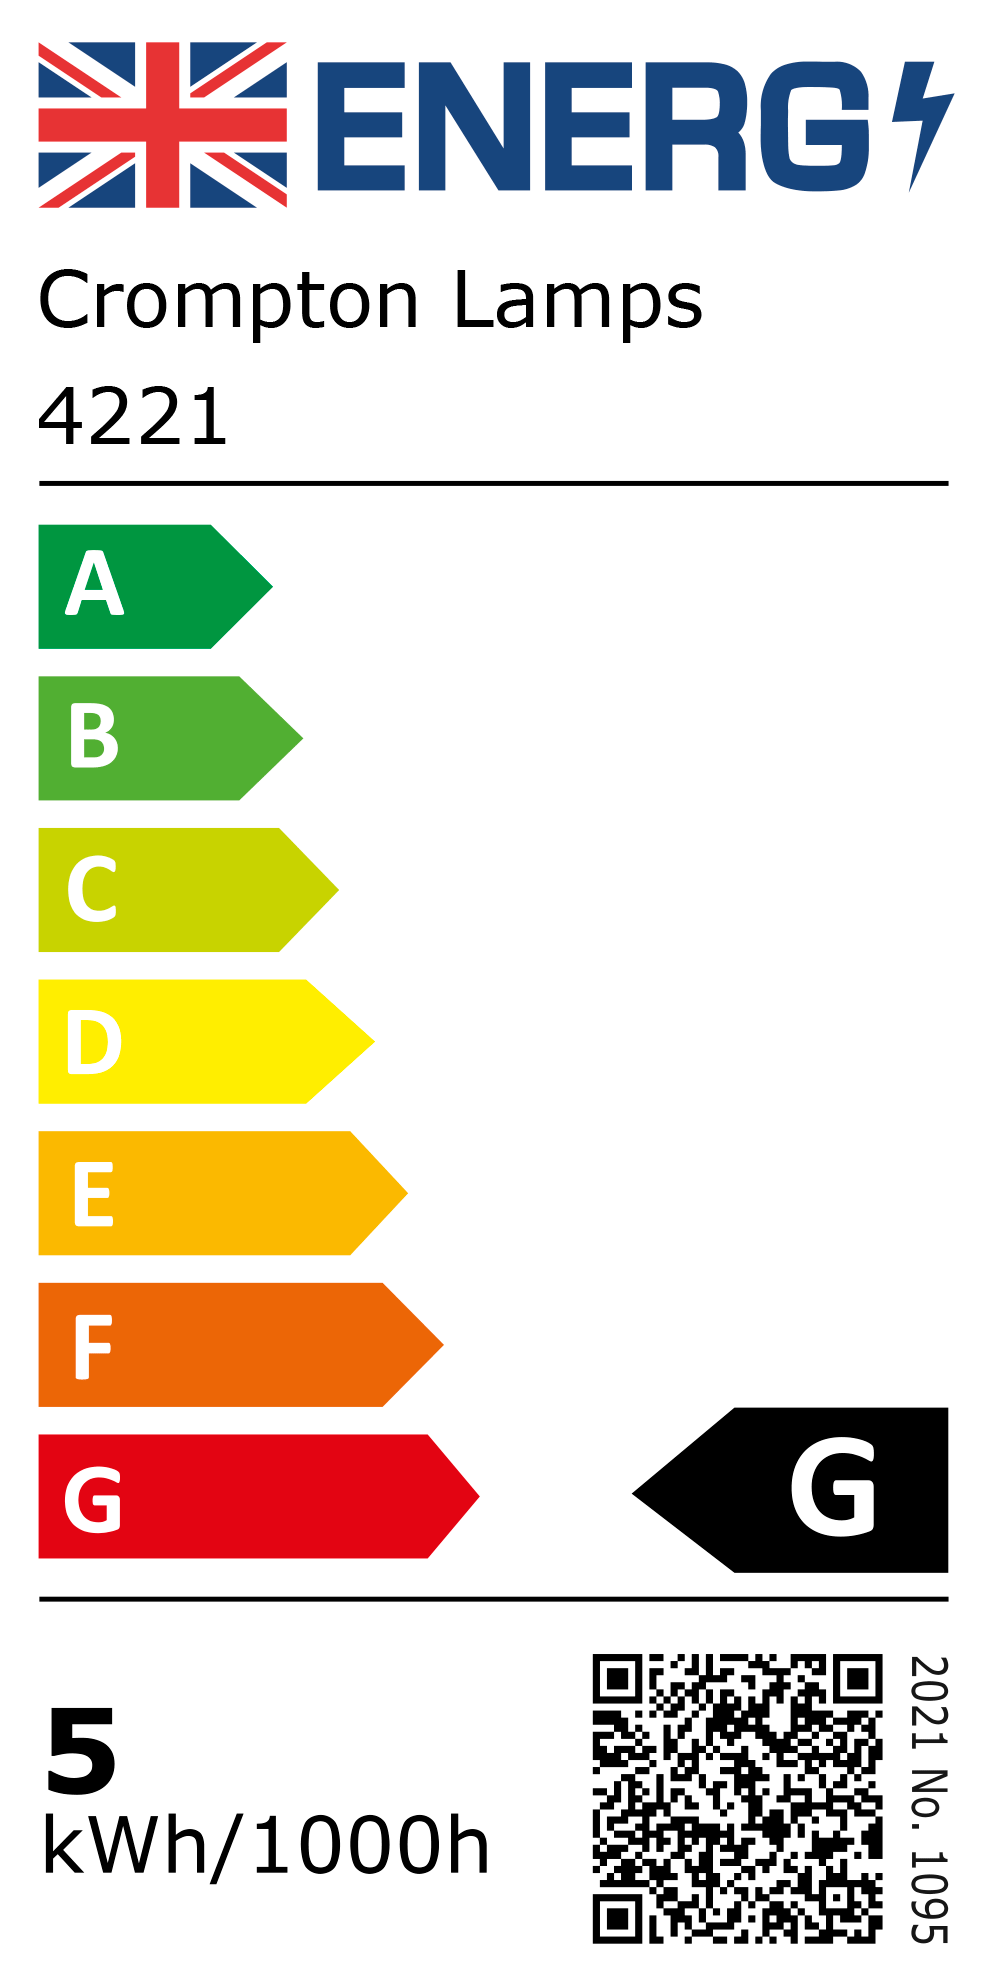 New 2021 Energy Rating Label: Stock Code 4221